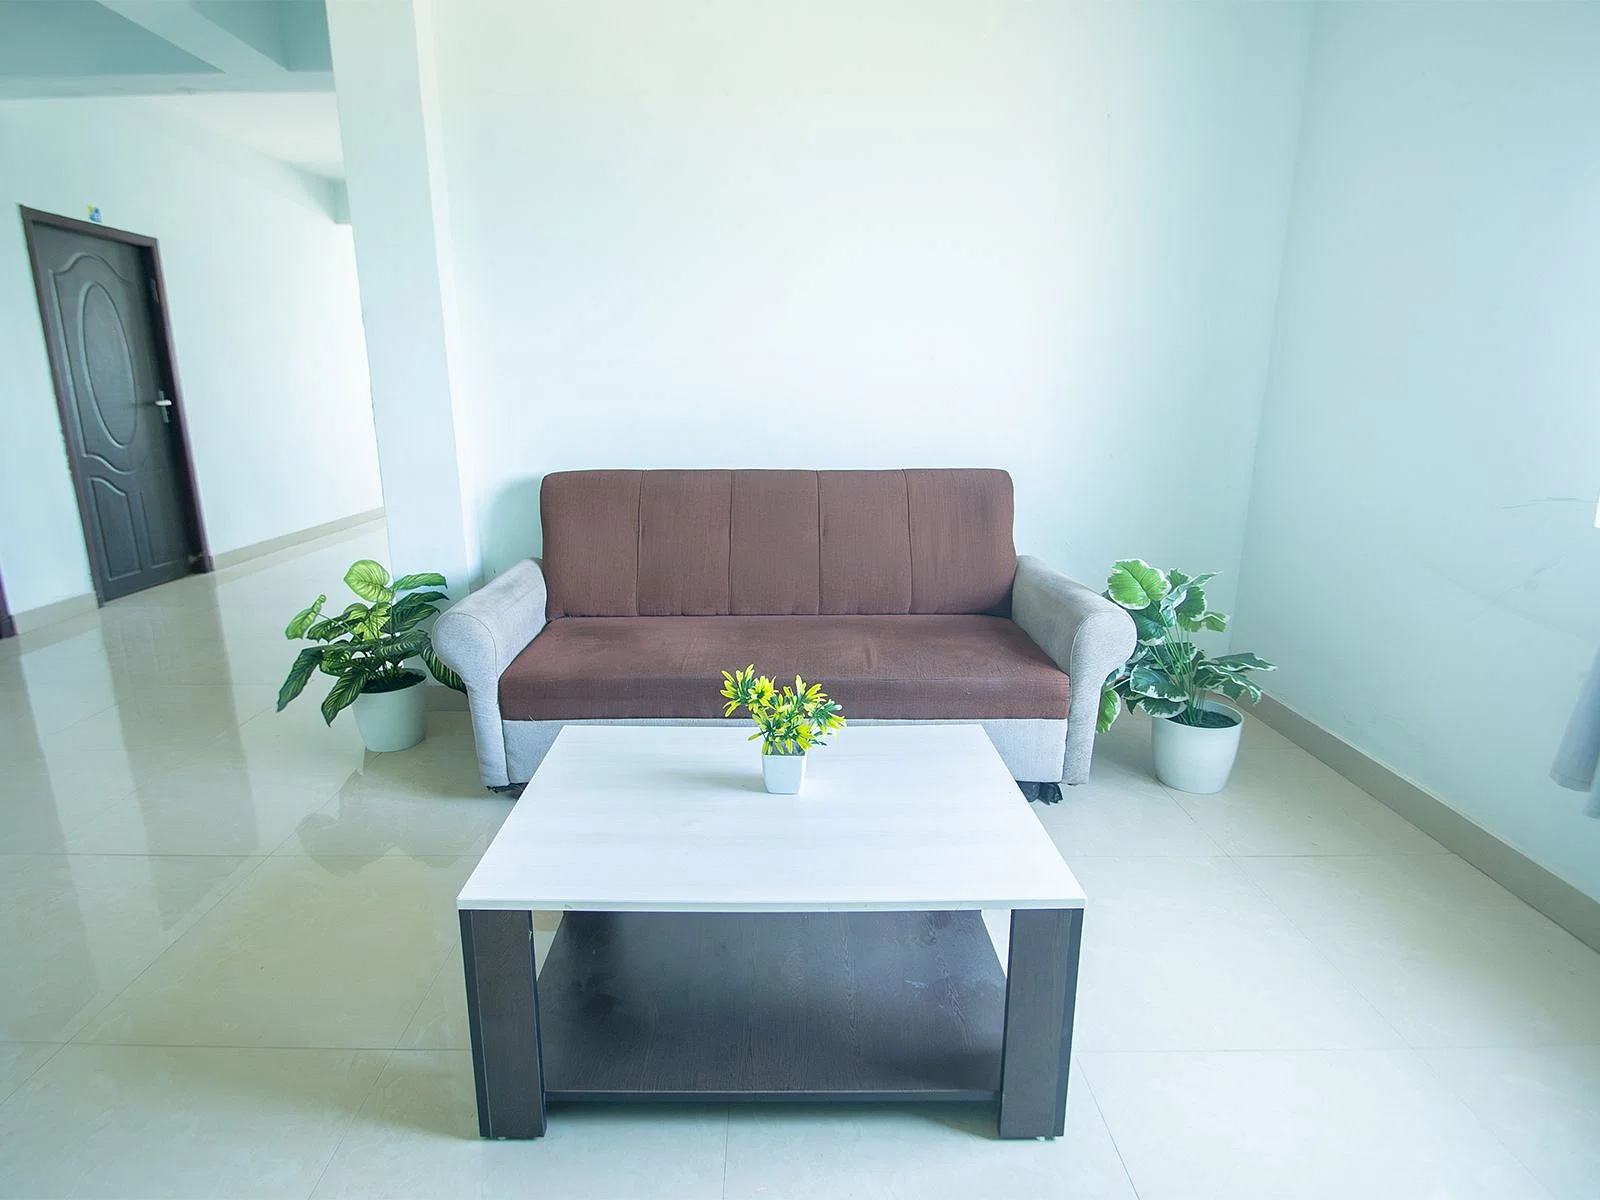 fully furnished Zolo single rooms for rent near me-check out now-Zolo Expresso